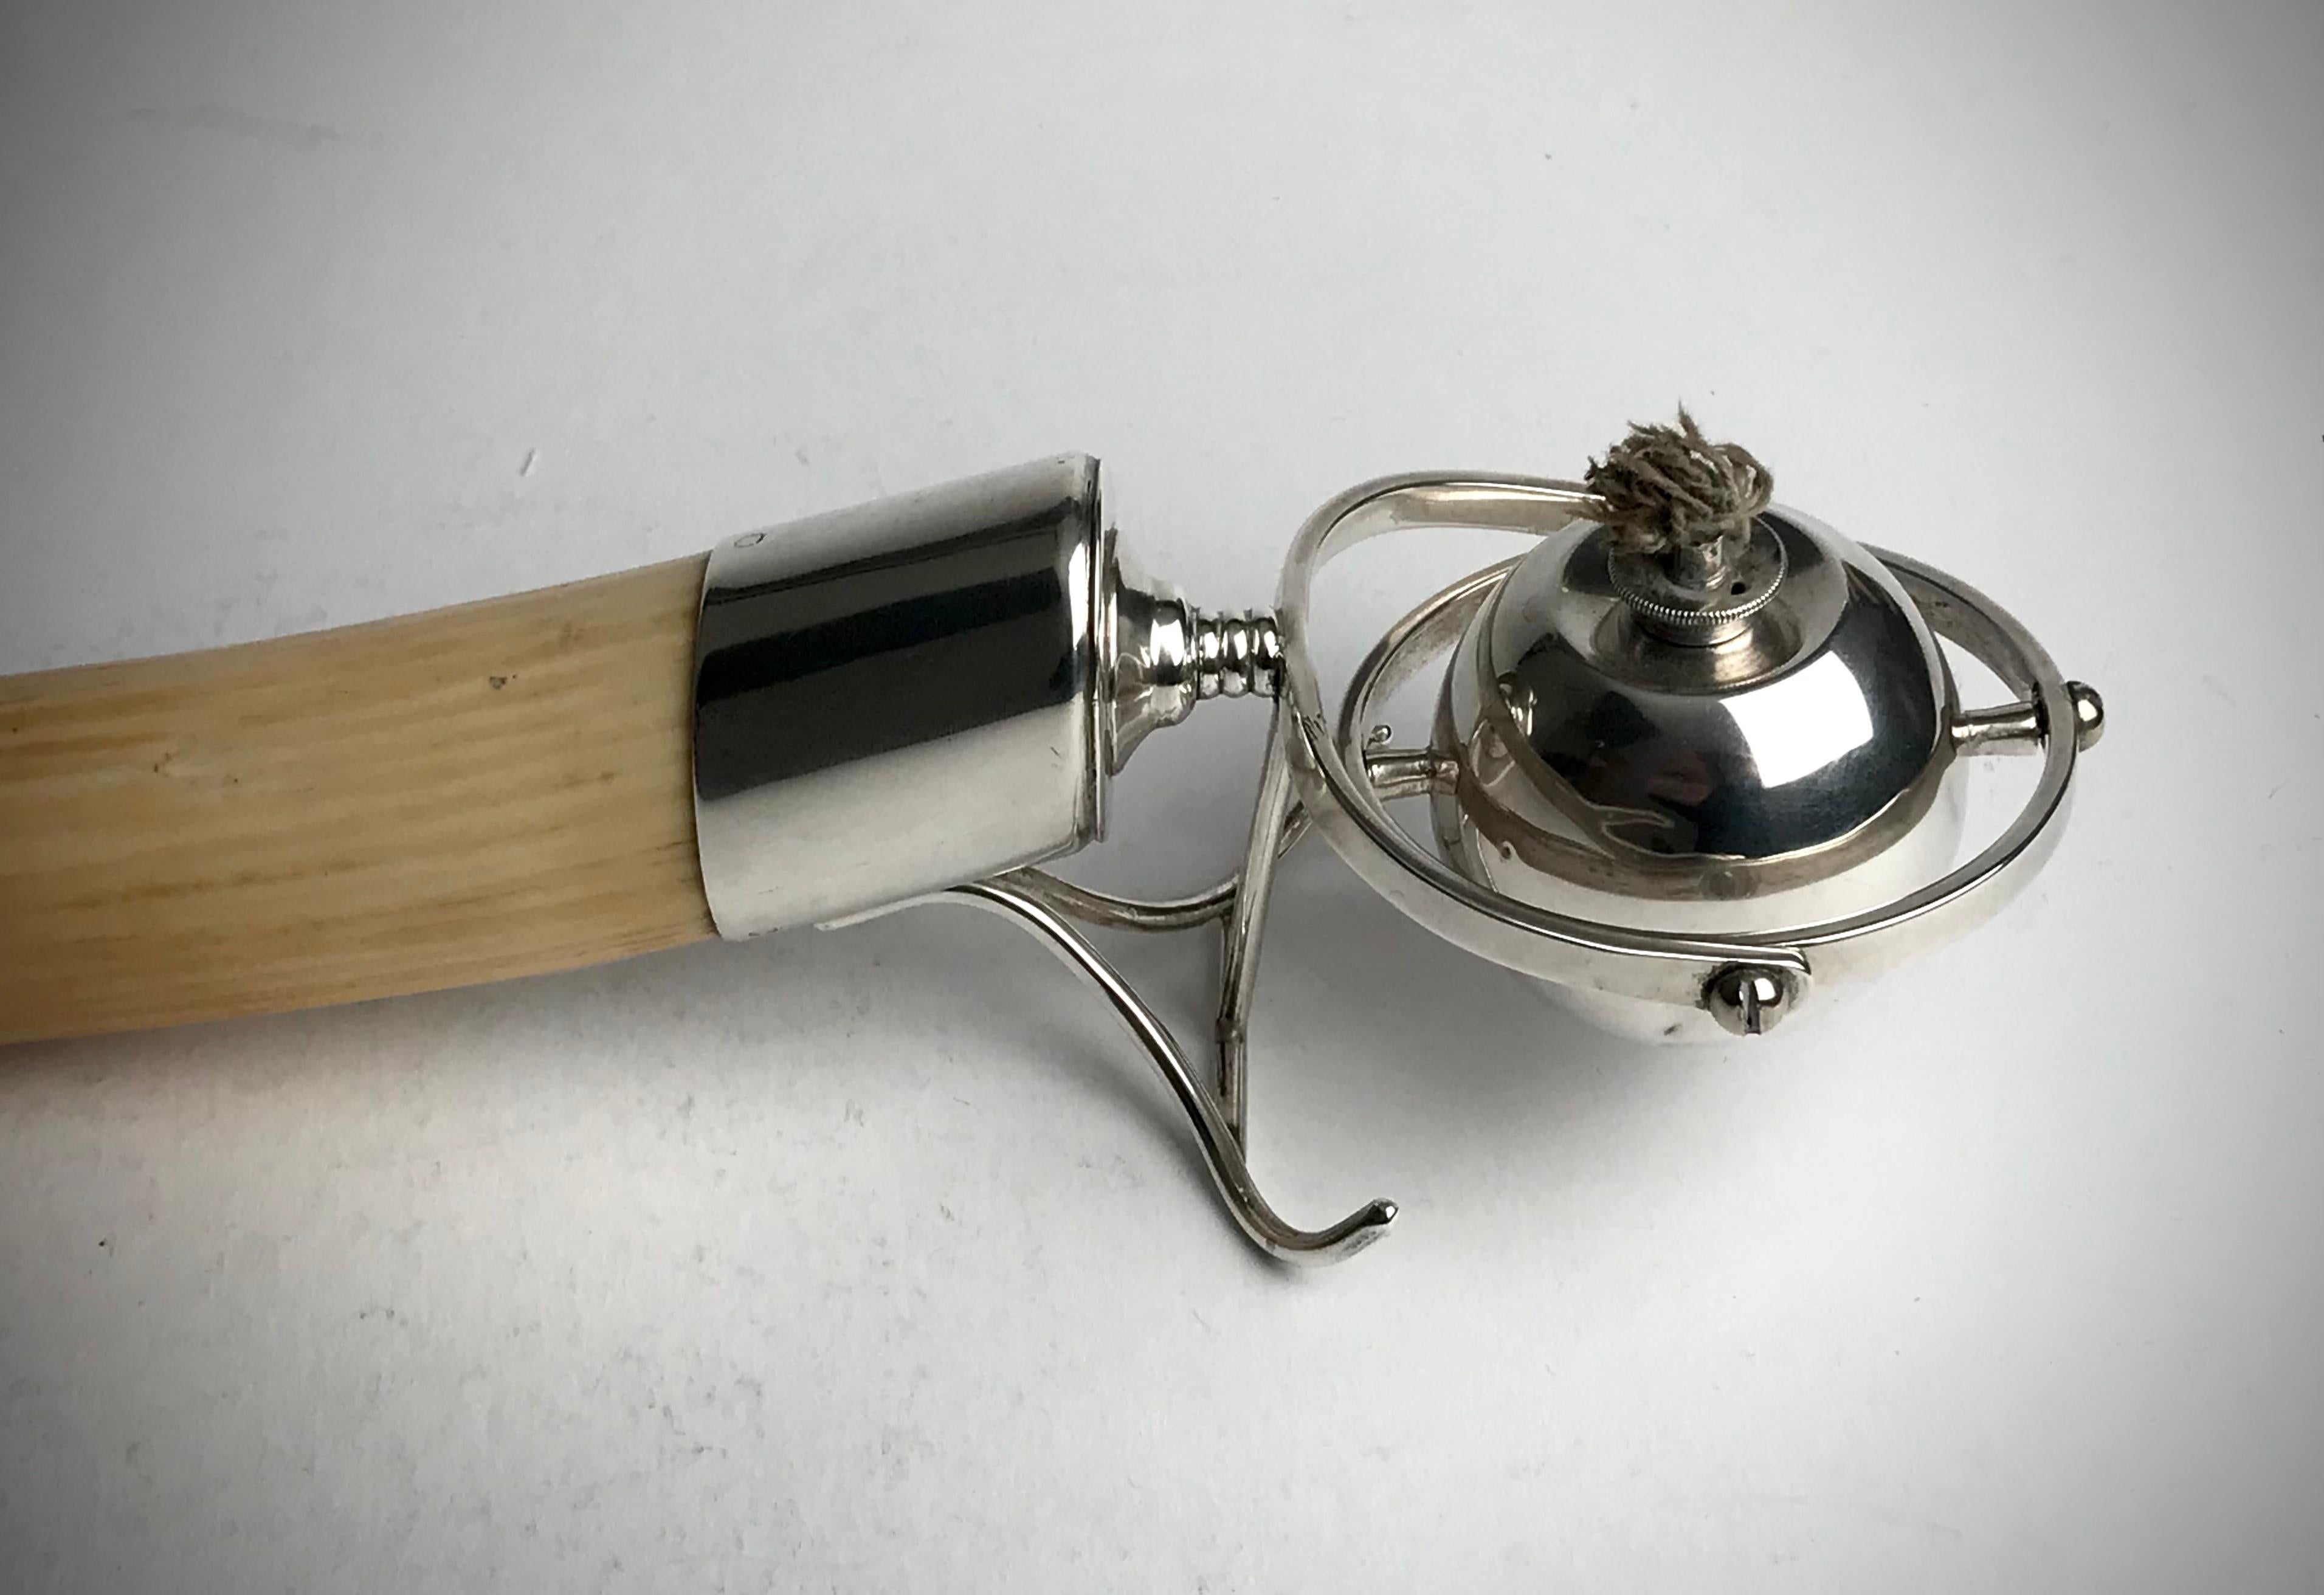 A Magnificent Solid Silver and Walrus Horn Table cigar Lighter, highly collected and still used to this day in gentleman’s clubs in London and  traditional households.

A wonderful piece of social history 

Hallmarked For London 1906
Silversmith